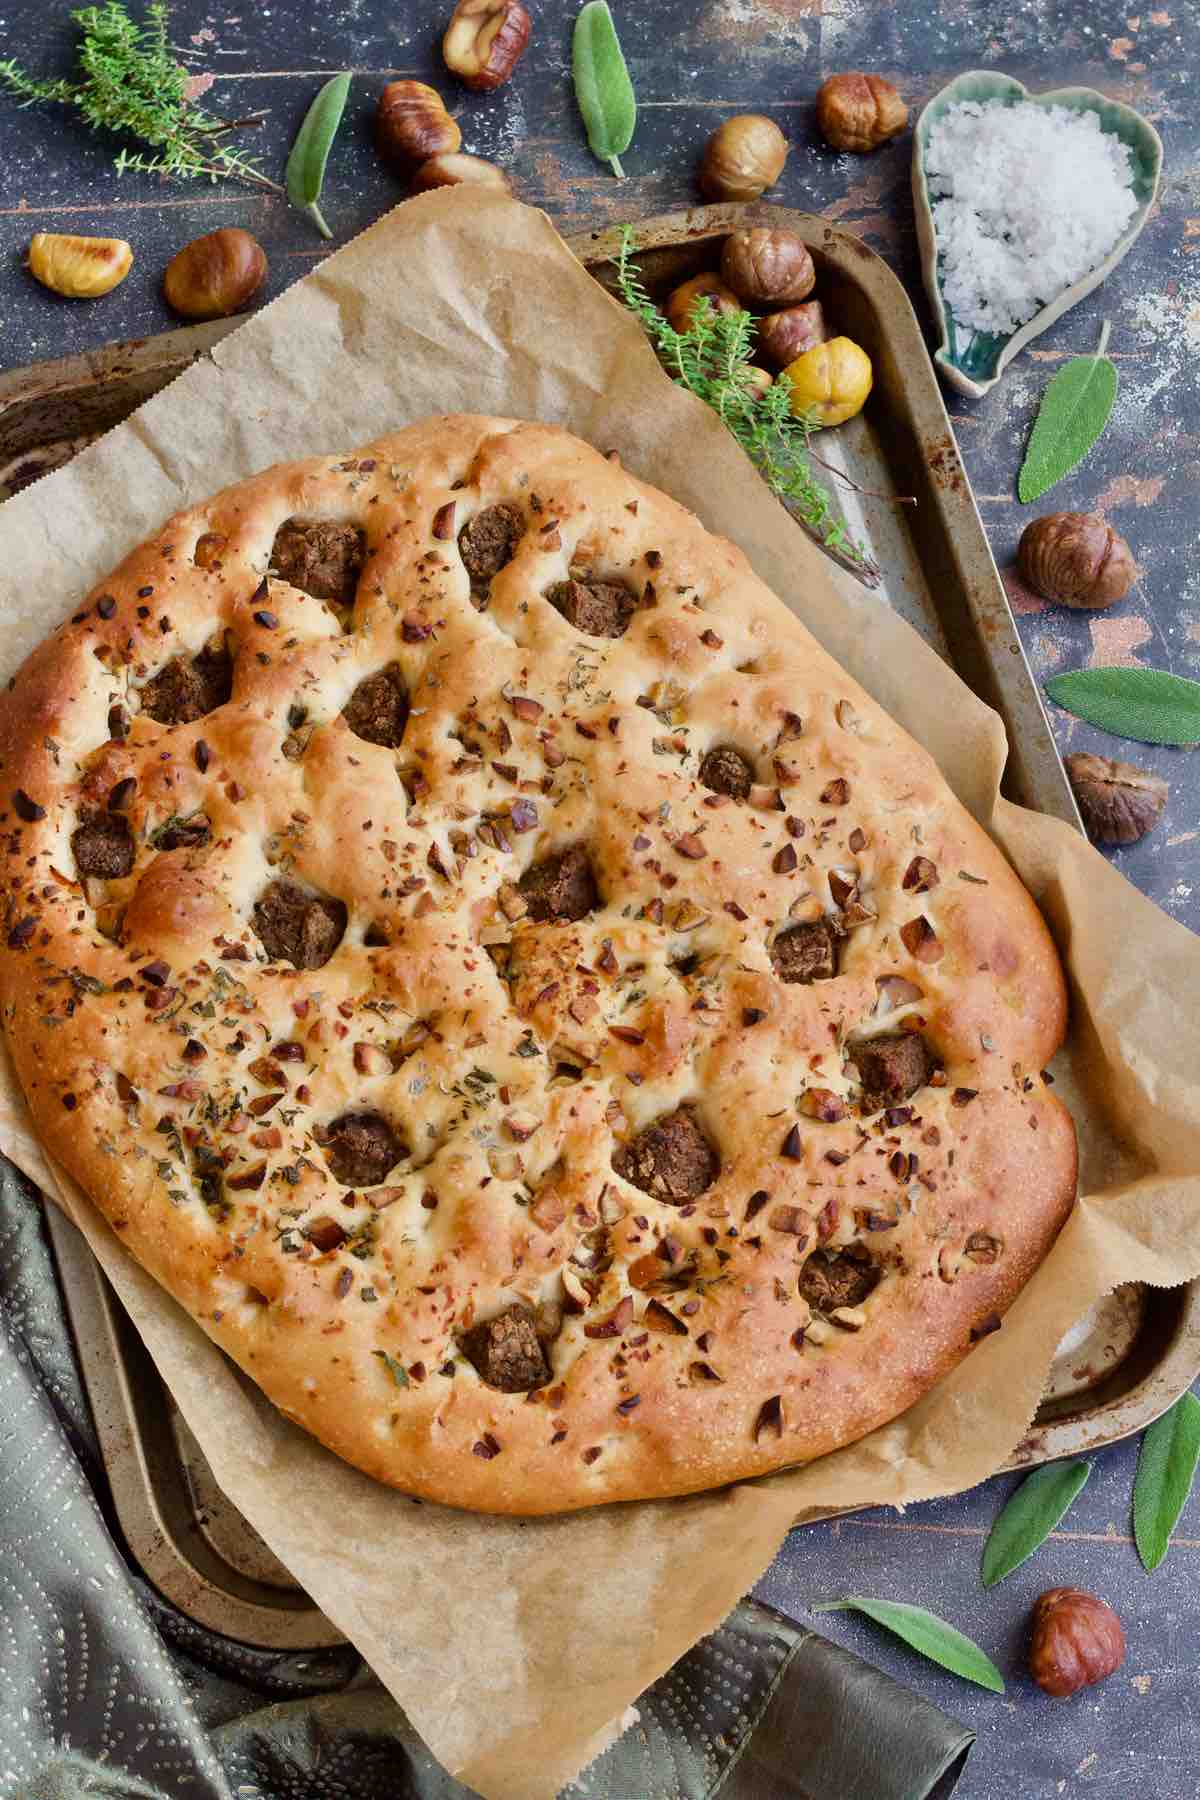 Christmas focaccia with chestnuts and stuffing.